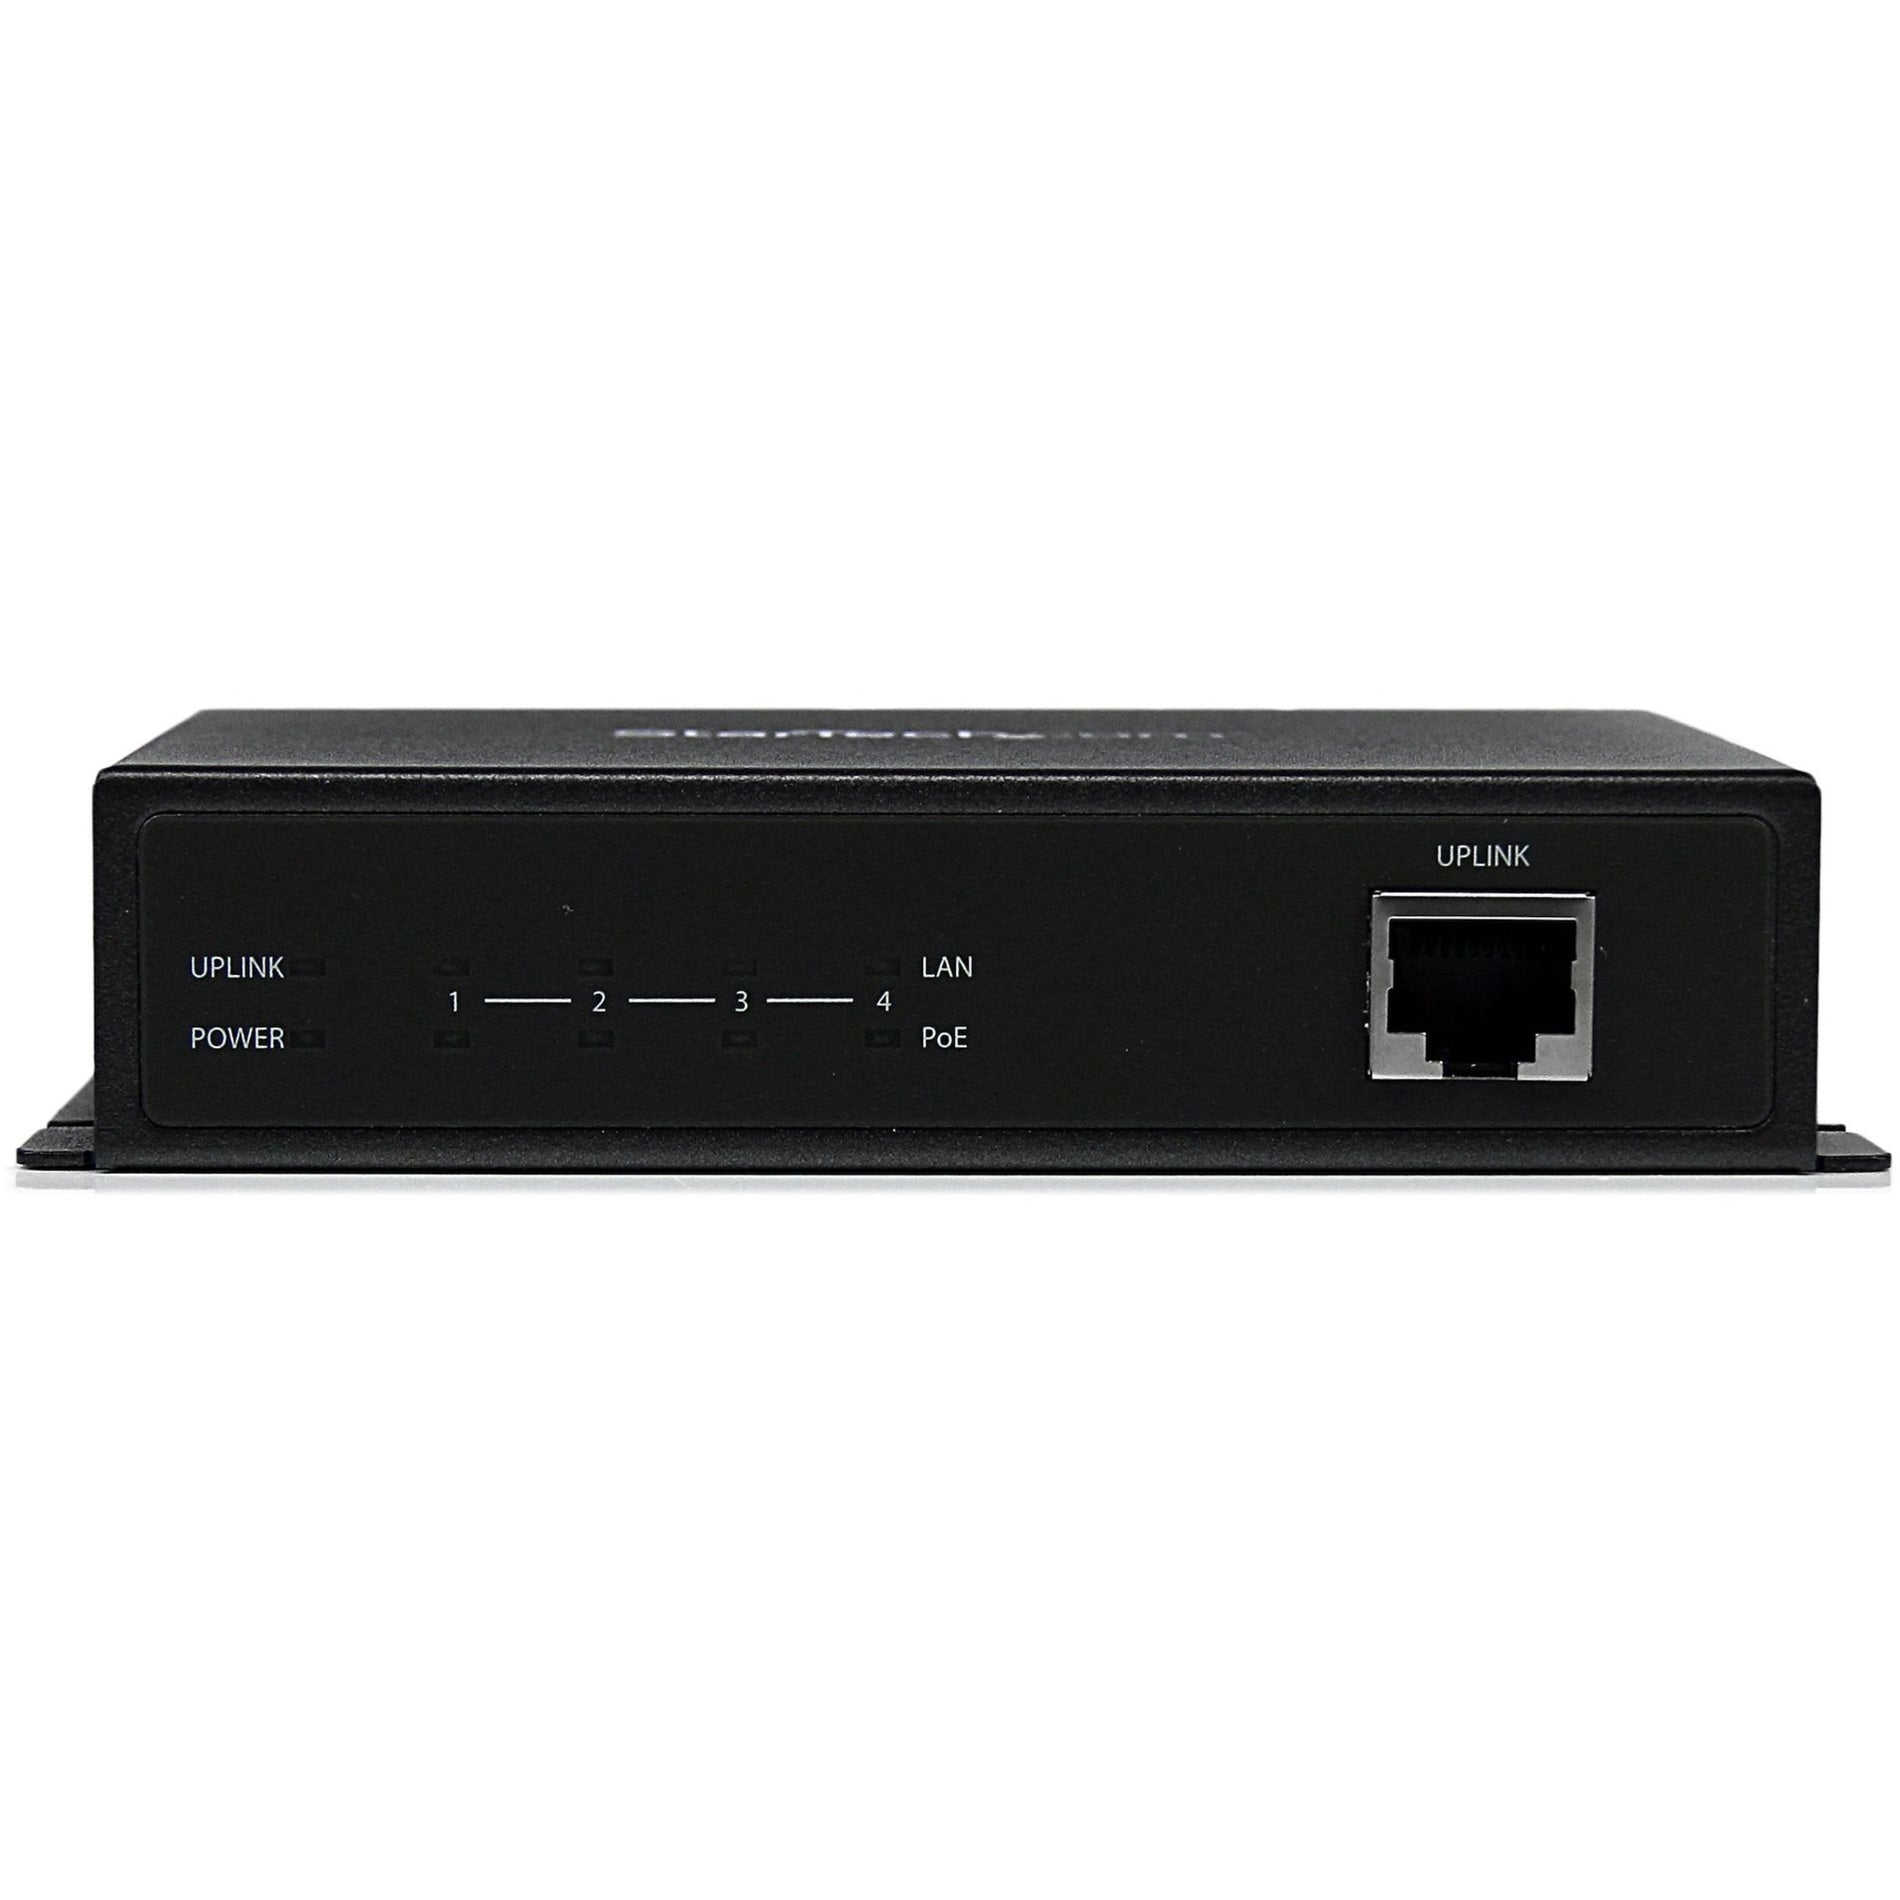 StarTech.com 5 Port Unmanaged Industrial Gigabit PoE Switch with 4 Power over Ethernet ports (IES51000POE)